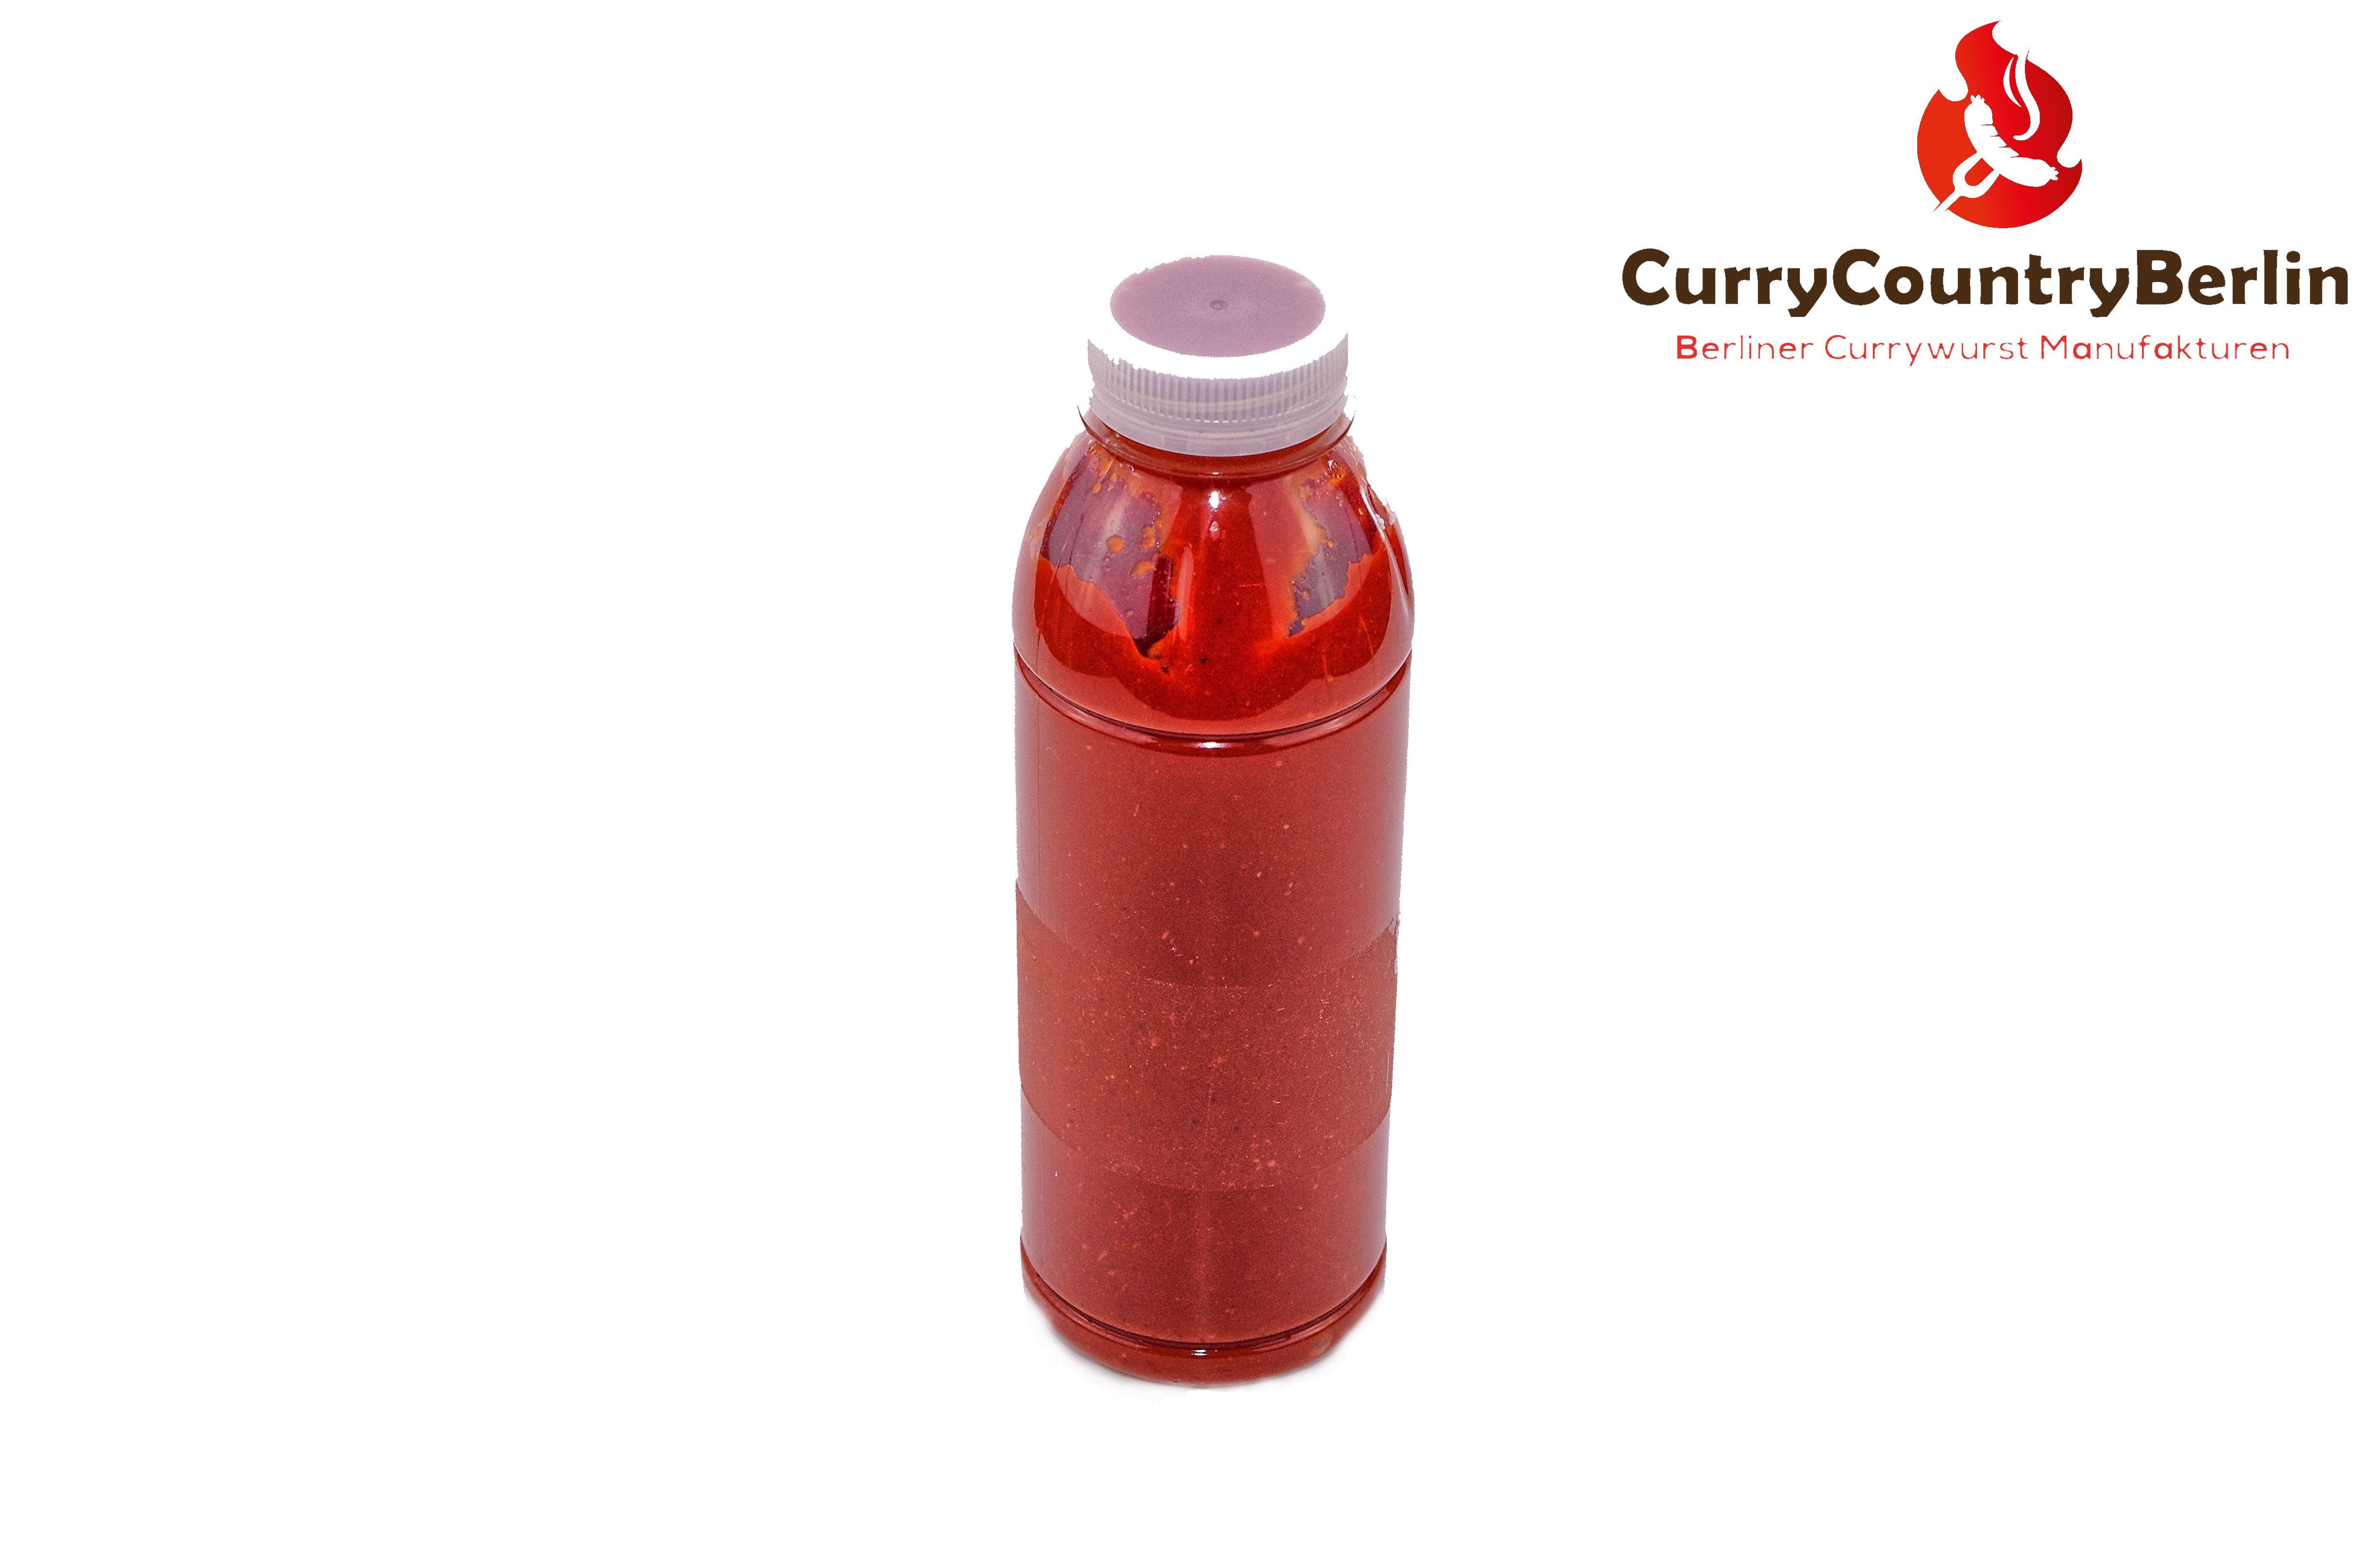 500 g Flasche CurryCountry's Sauce Flavour